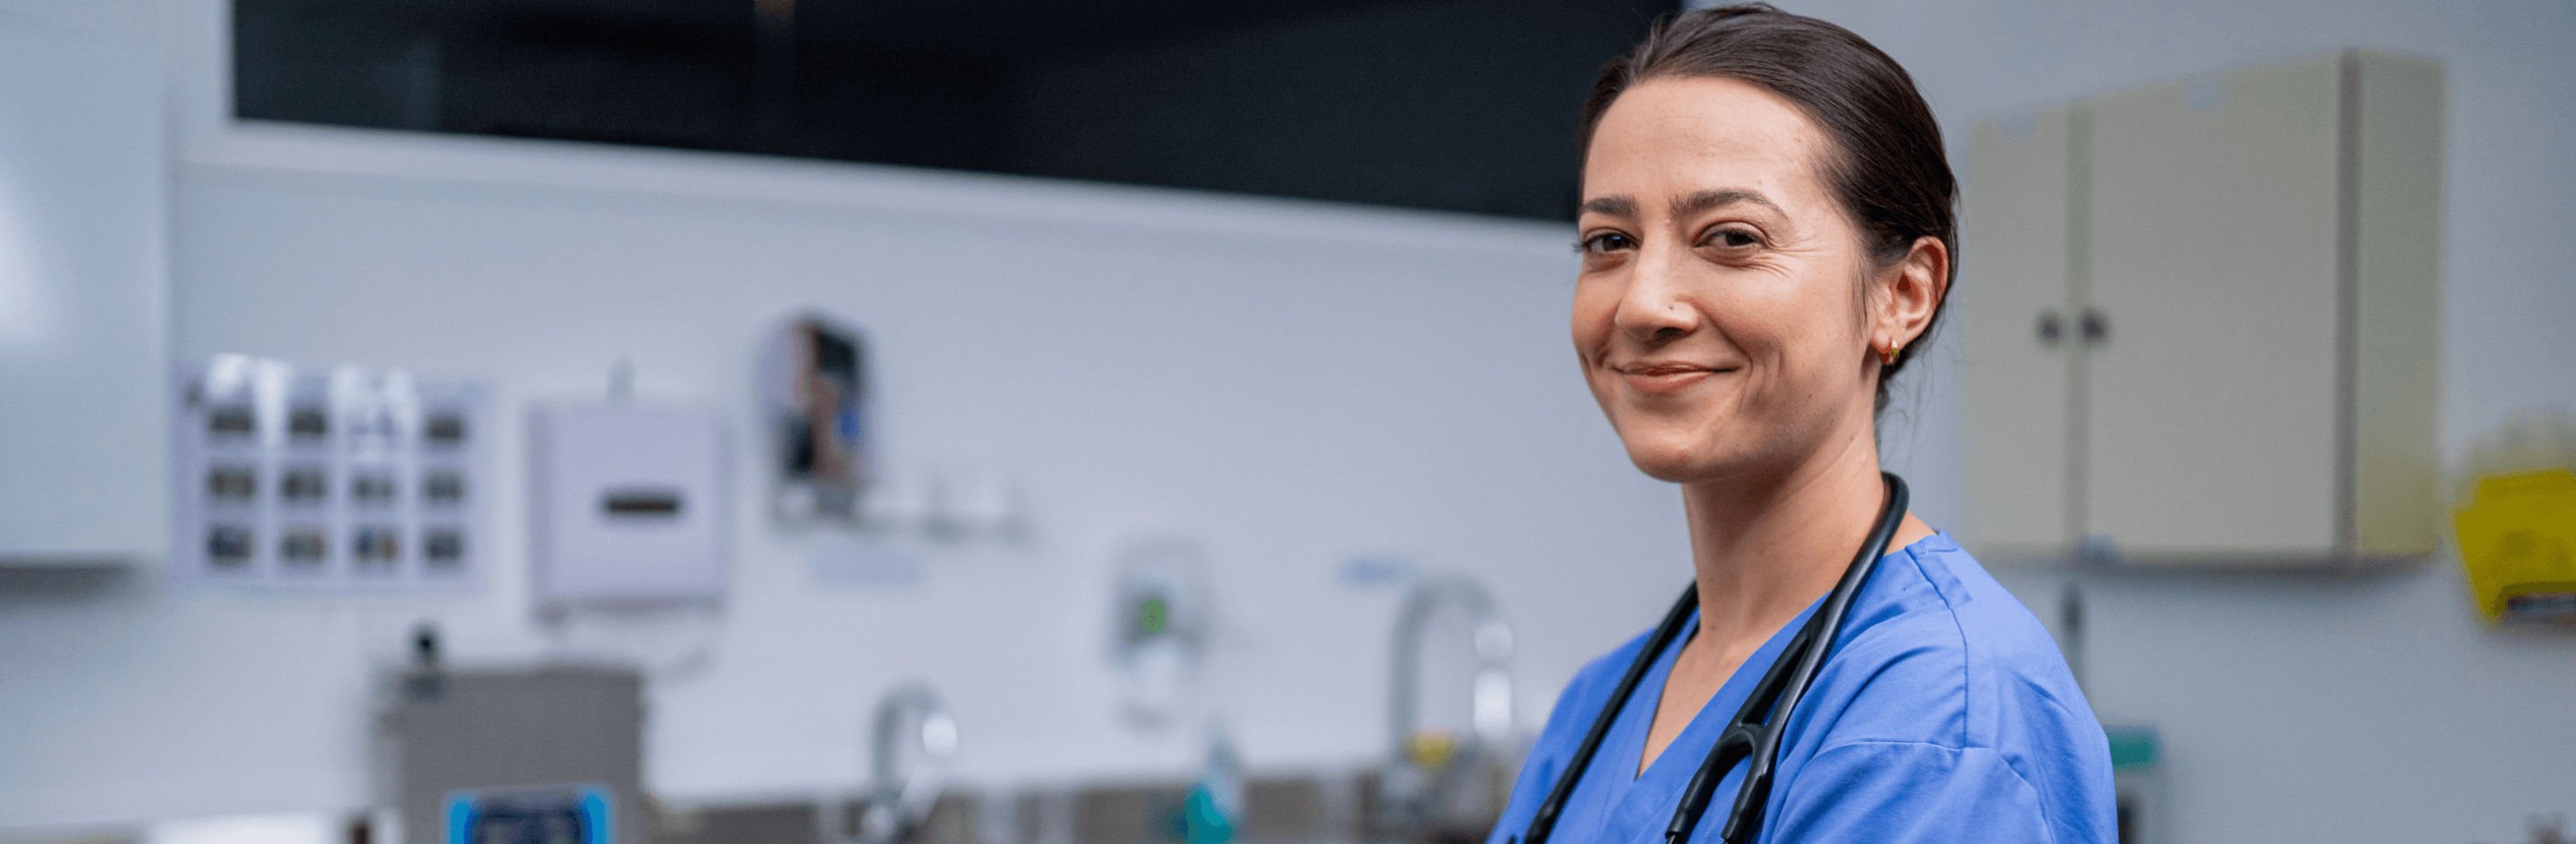 Search gastro doctor jobs